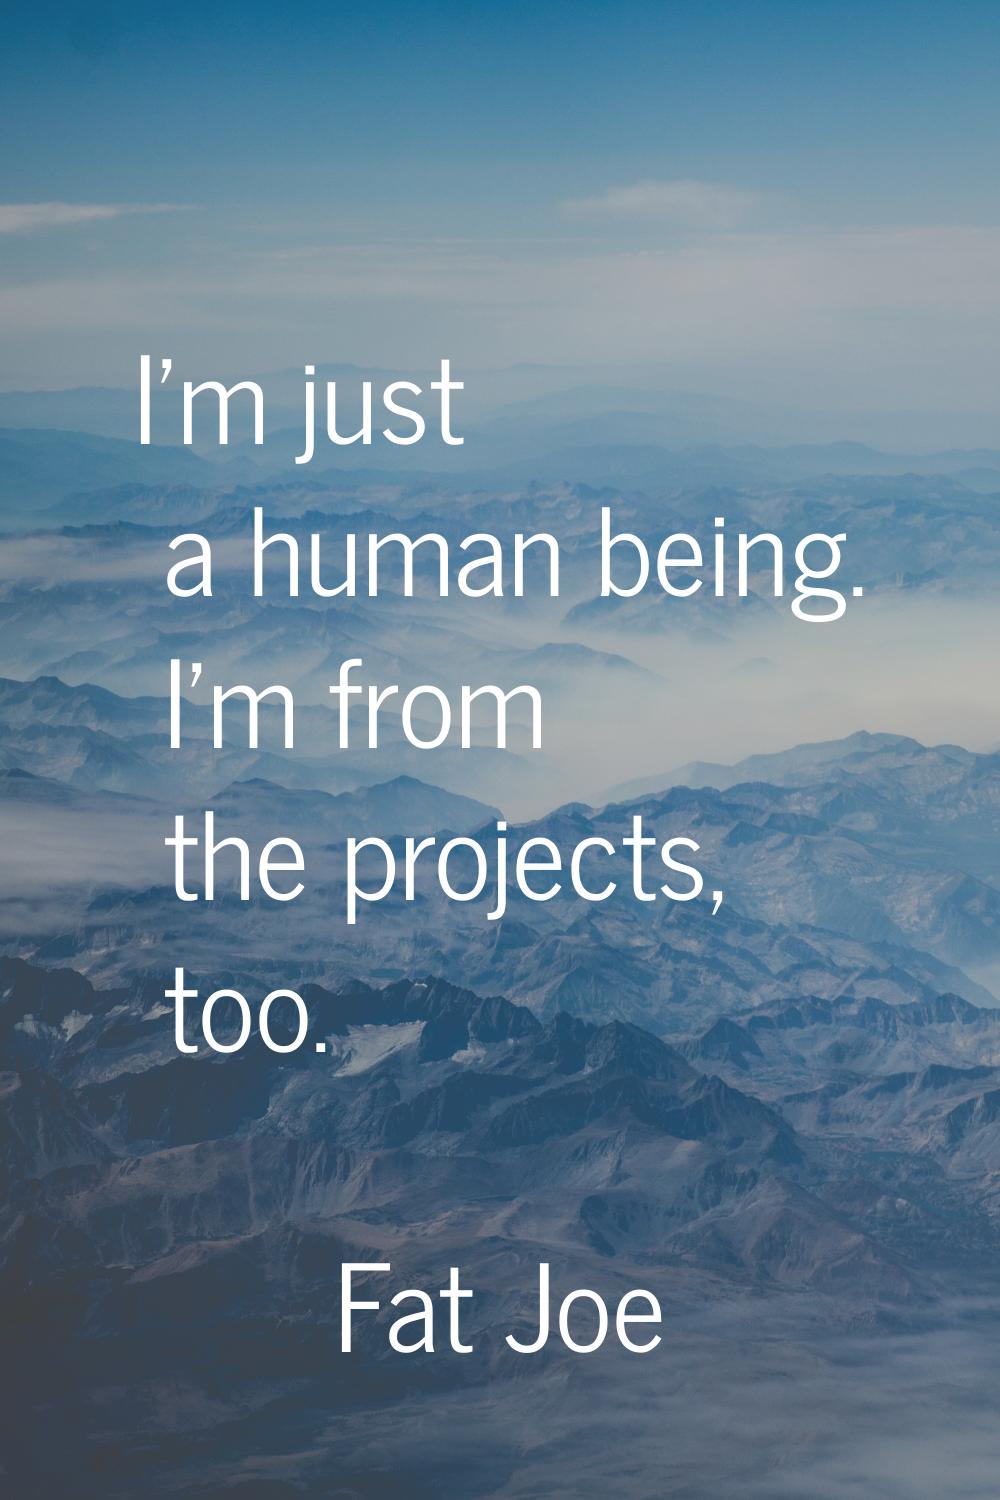 I'm just a human being. I'm from the projects, too.